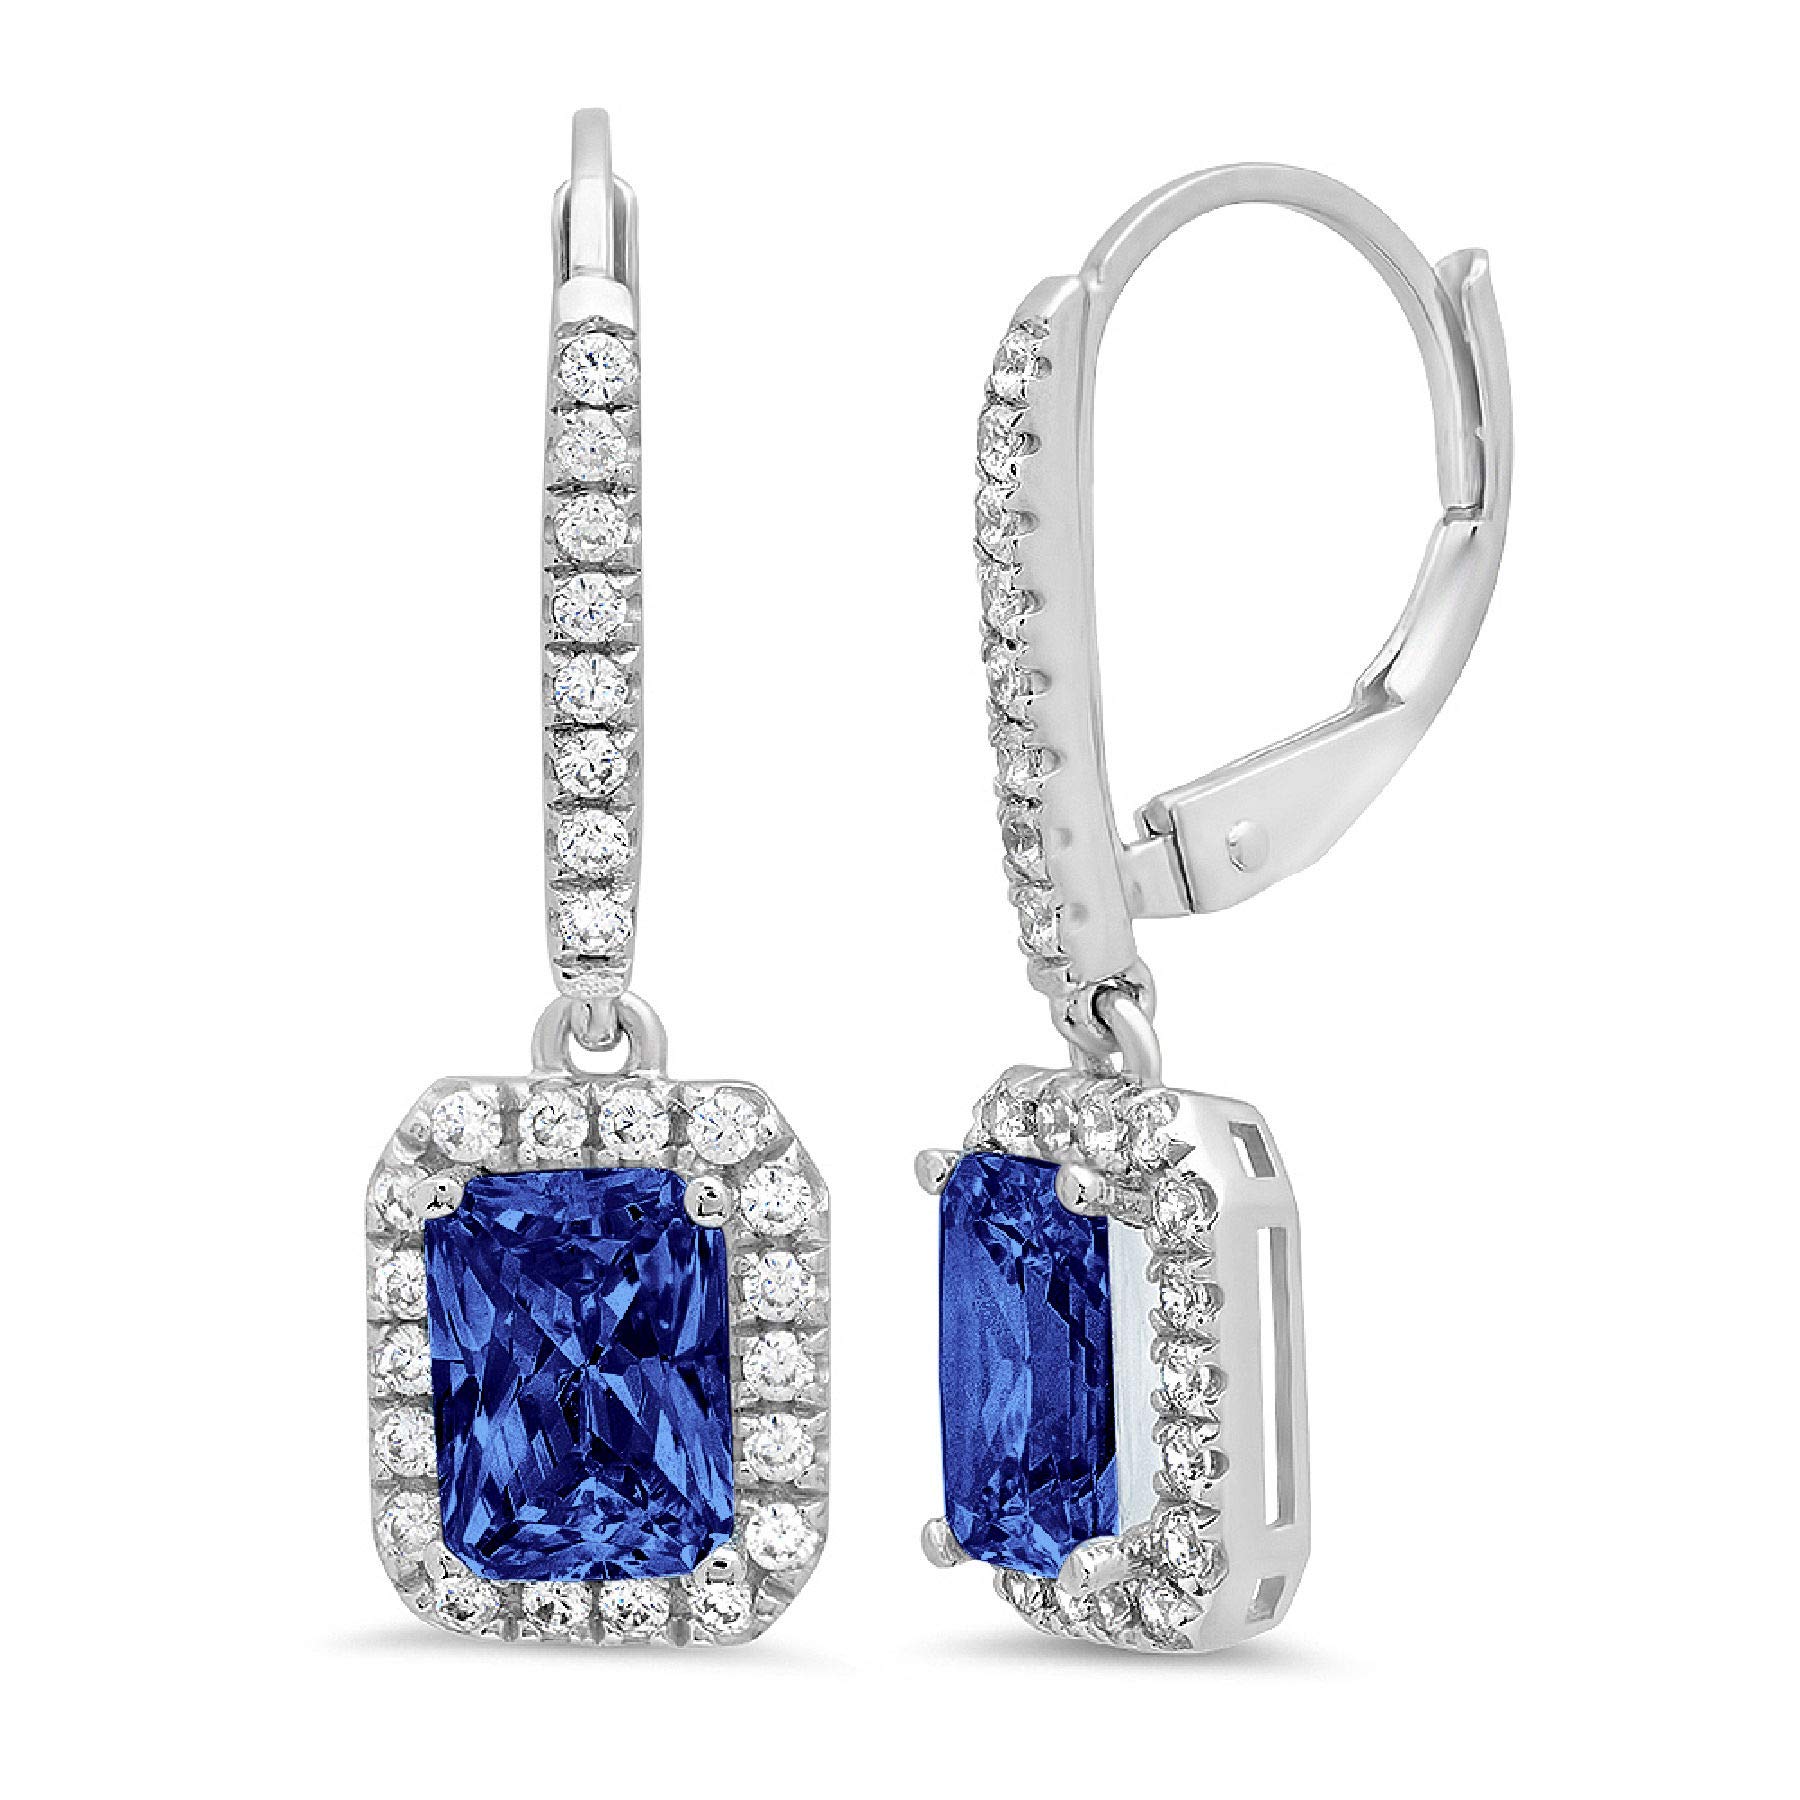 3.51cttw Emerald Brilliant Round Cut Halo Solitaire Flawless Genuine Simulated CZ Blue Tanzanite Gemstone Unisex Pair of Designer Lever back Drop Dangle Earrings Solid 14kWhite Gold